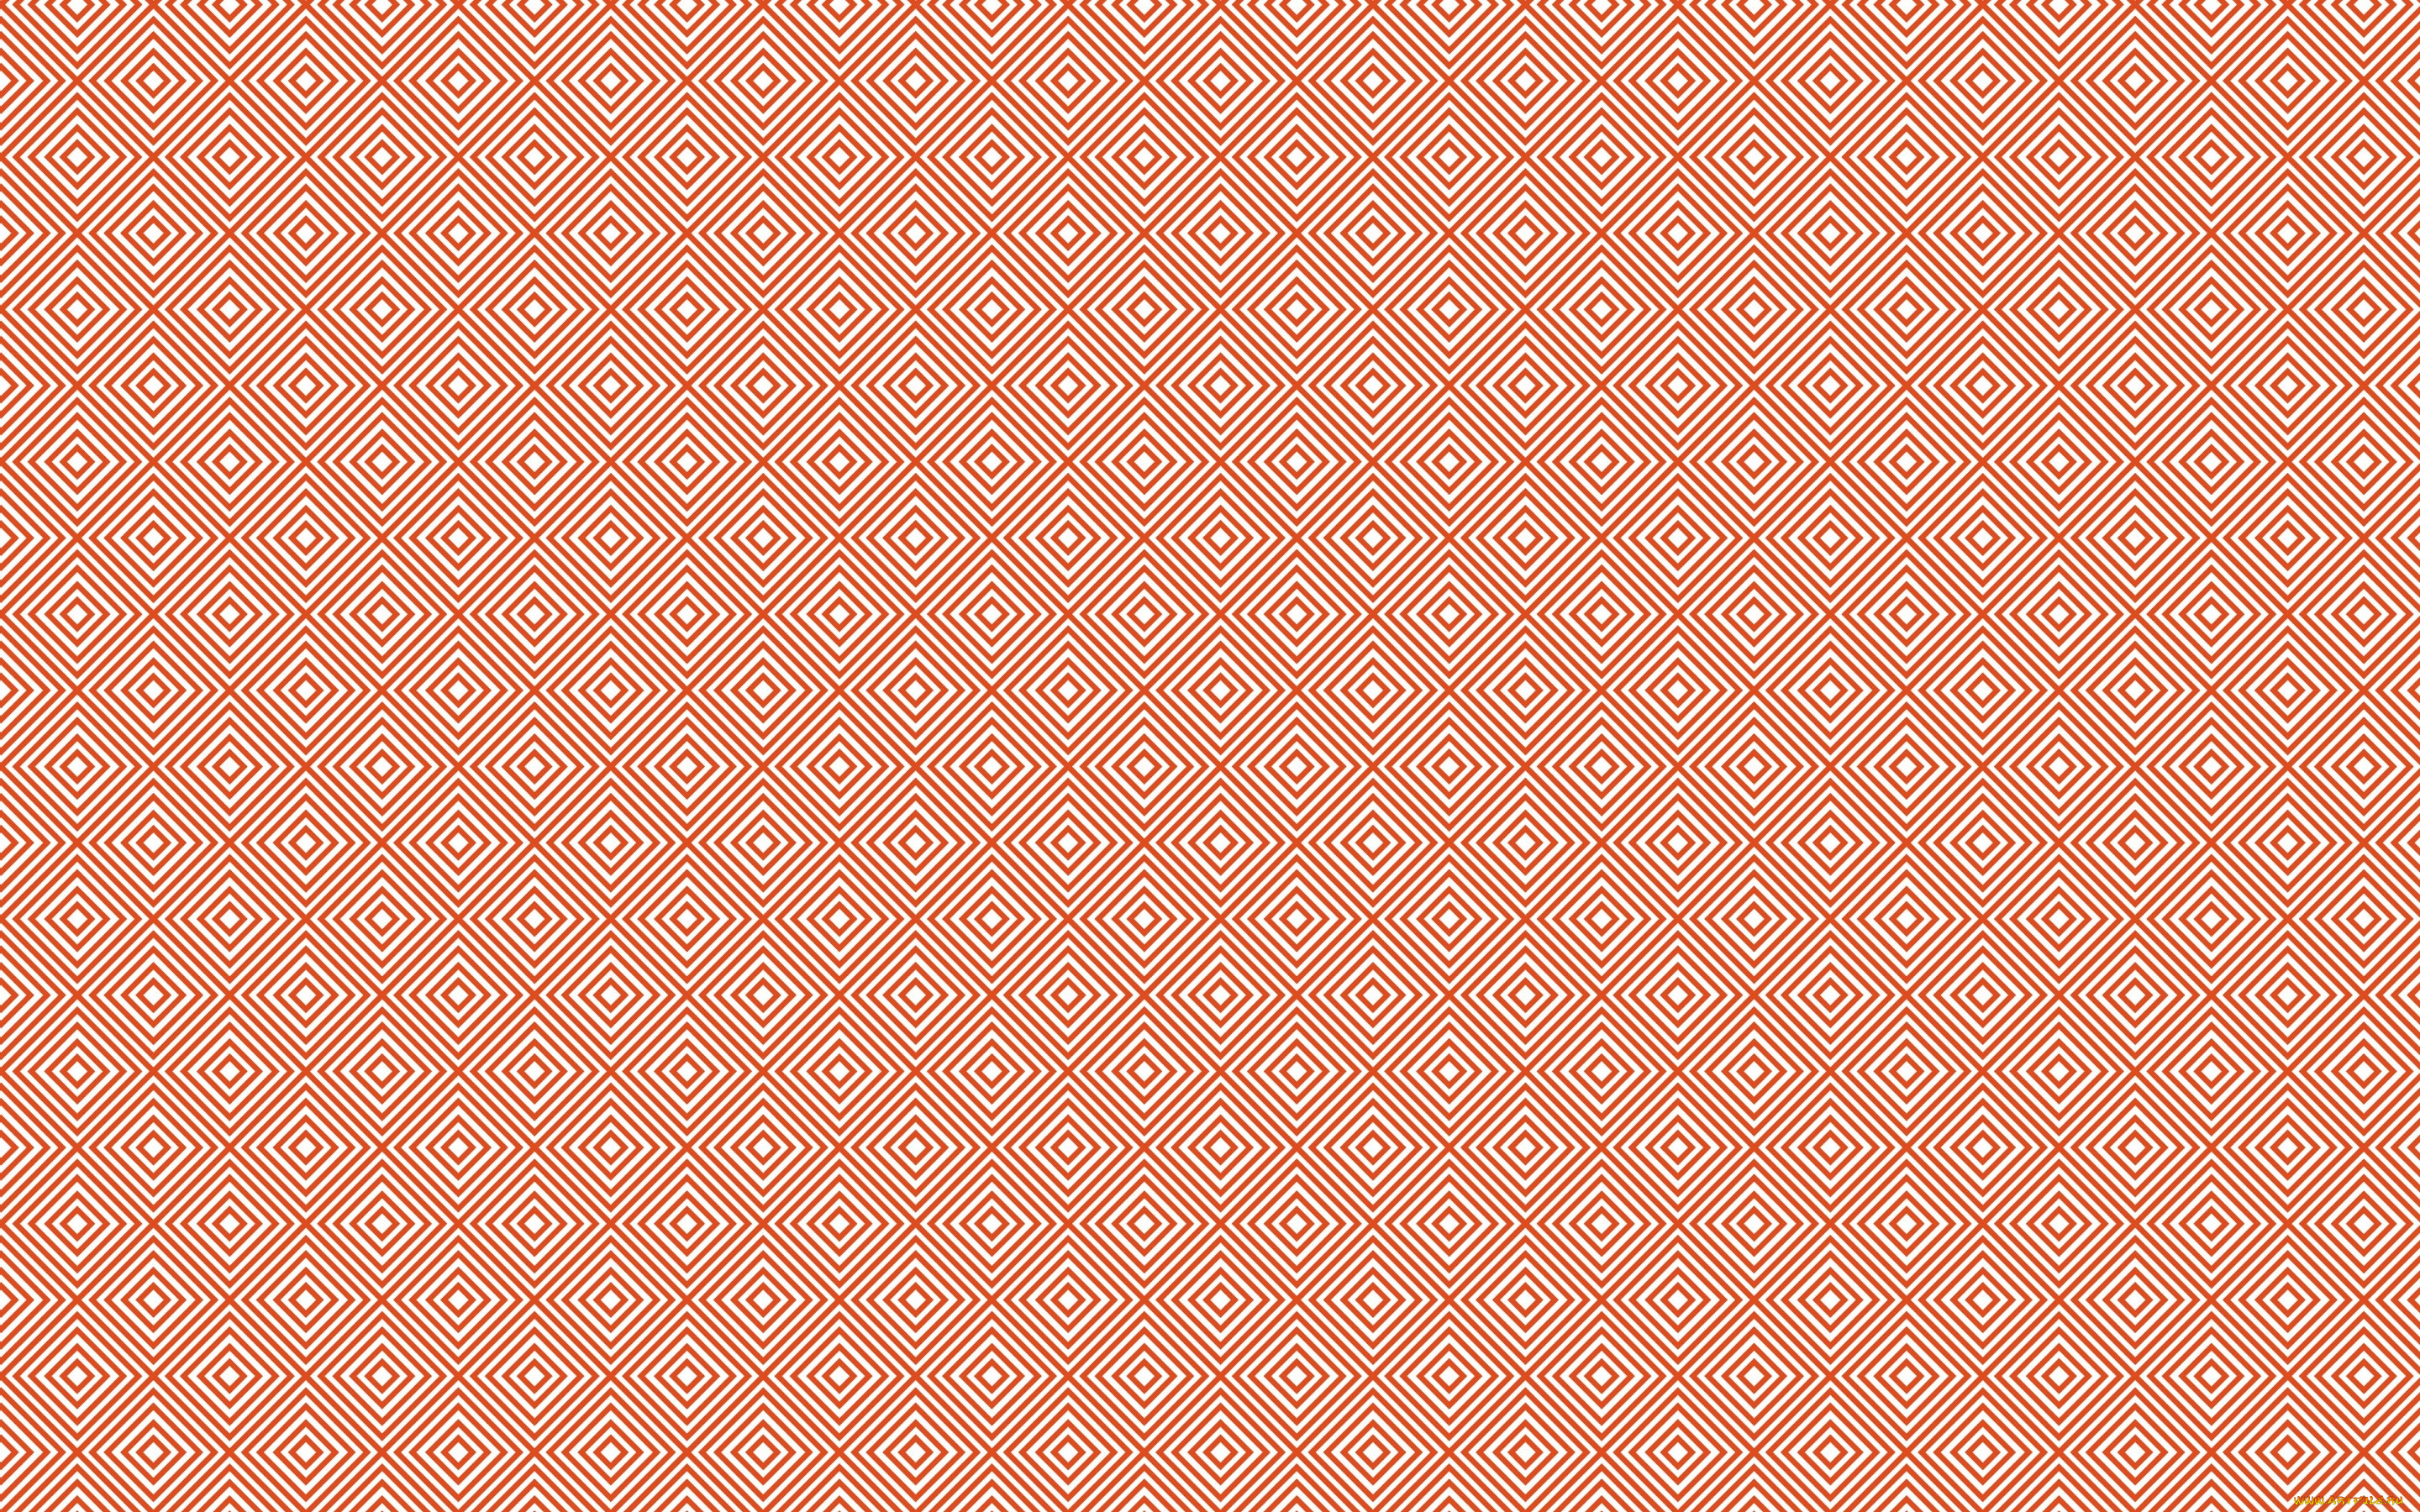  ,  , graphics, pattern, striped, , , seamless, repeating, vector